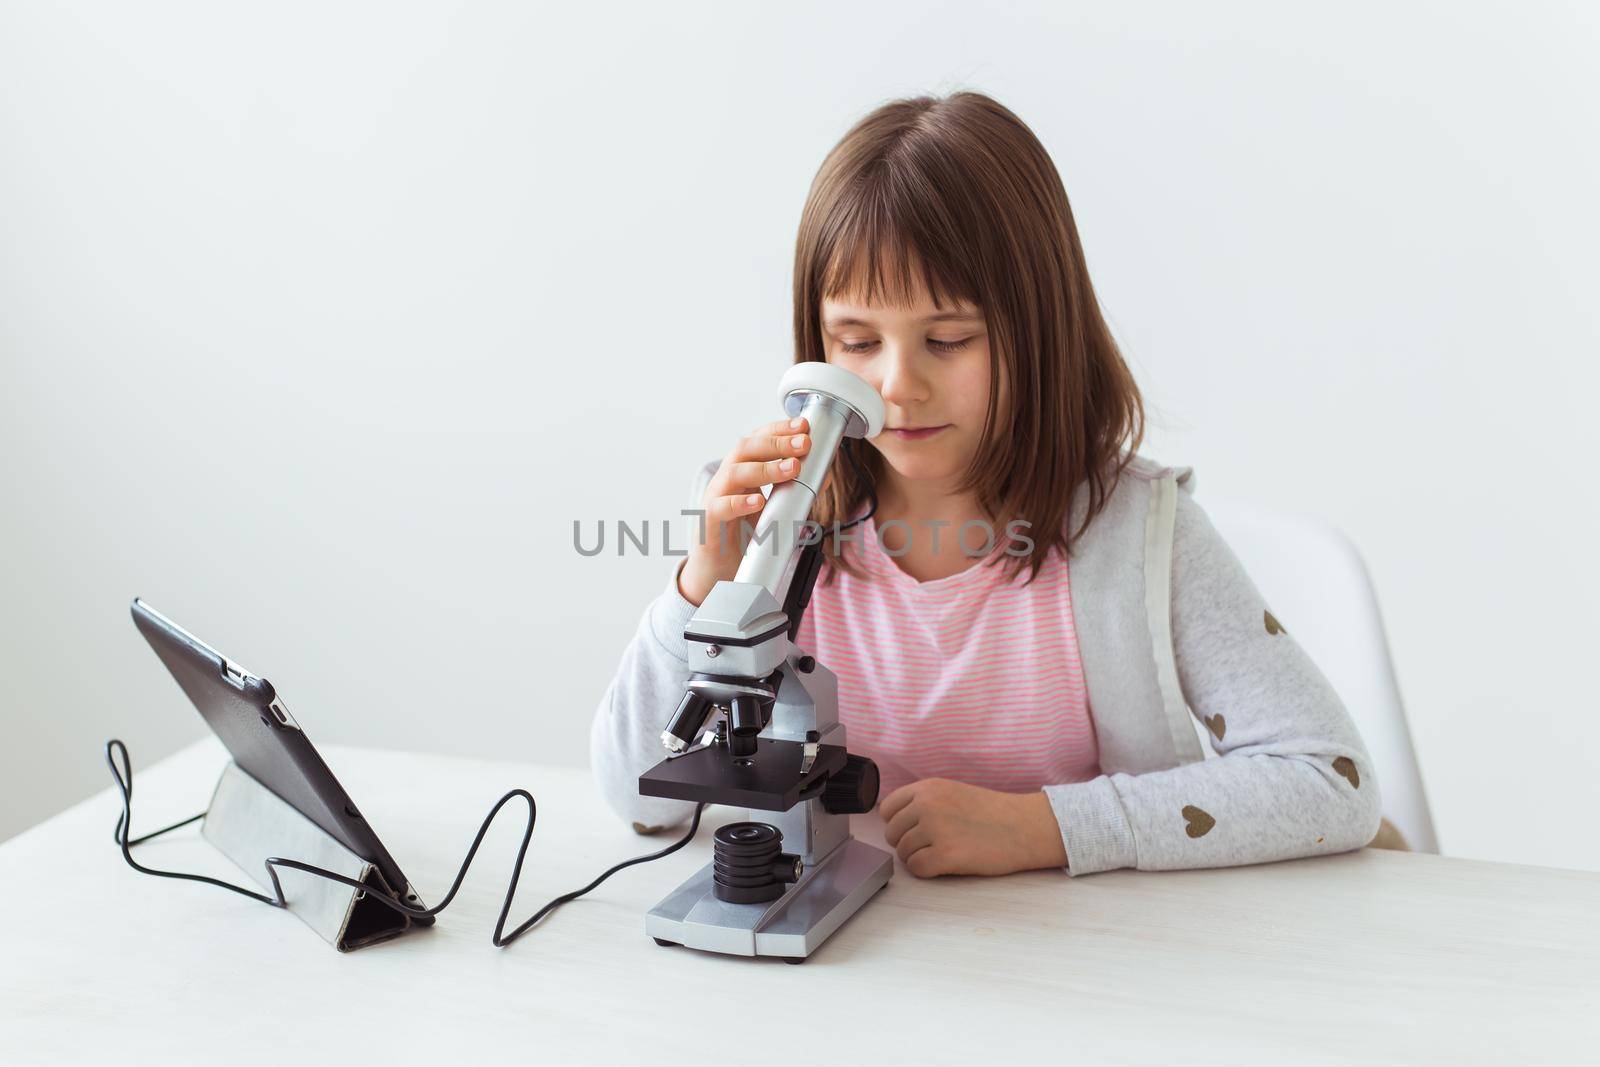 Portrait of cute little child doing homework with a digital microscope Technologies, science and children.